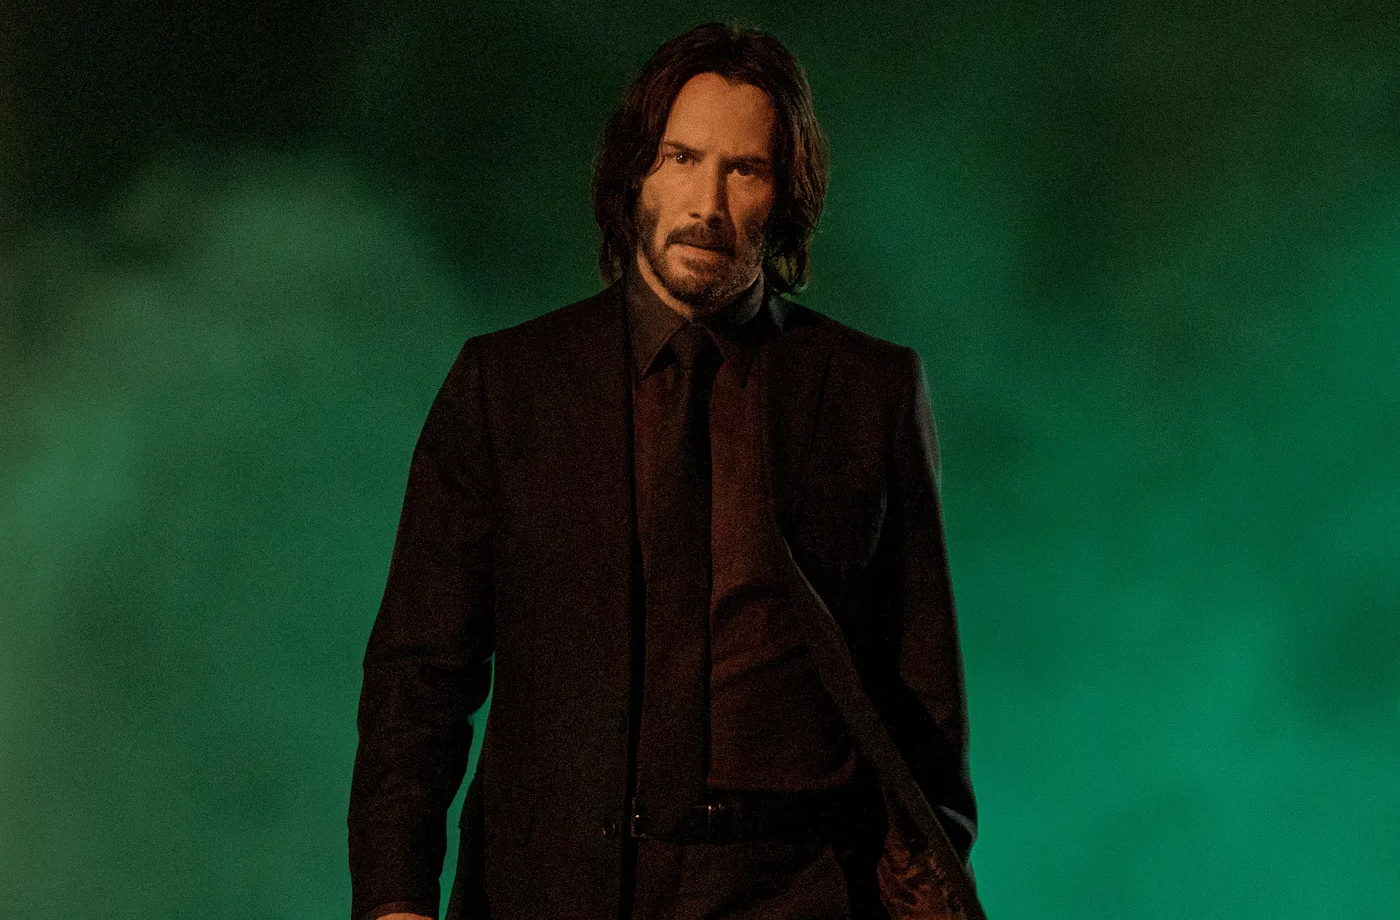 Podcast: ‘John Wick 4’ and More